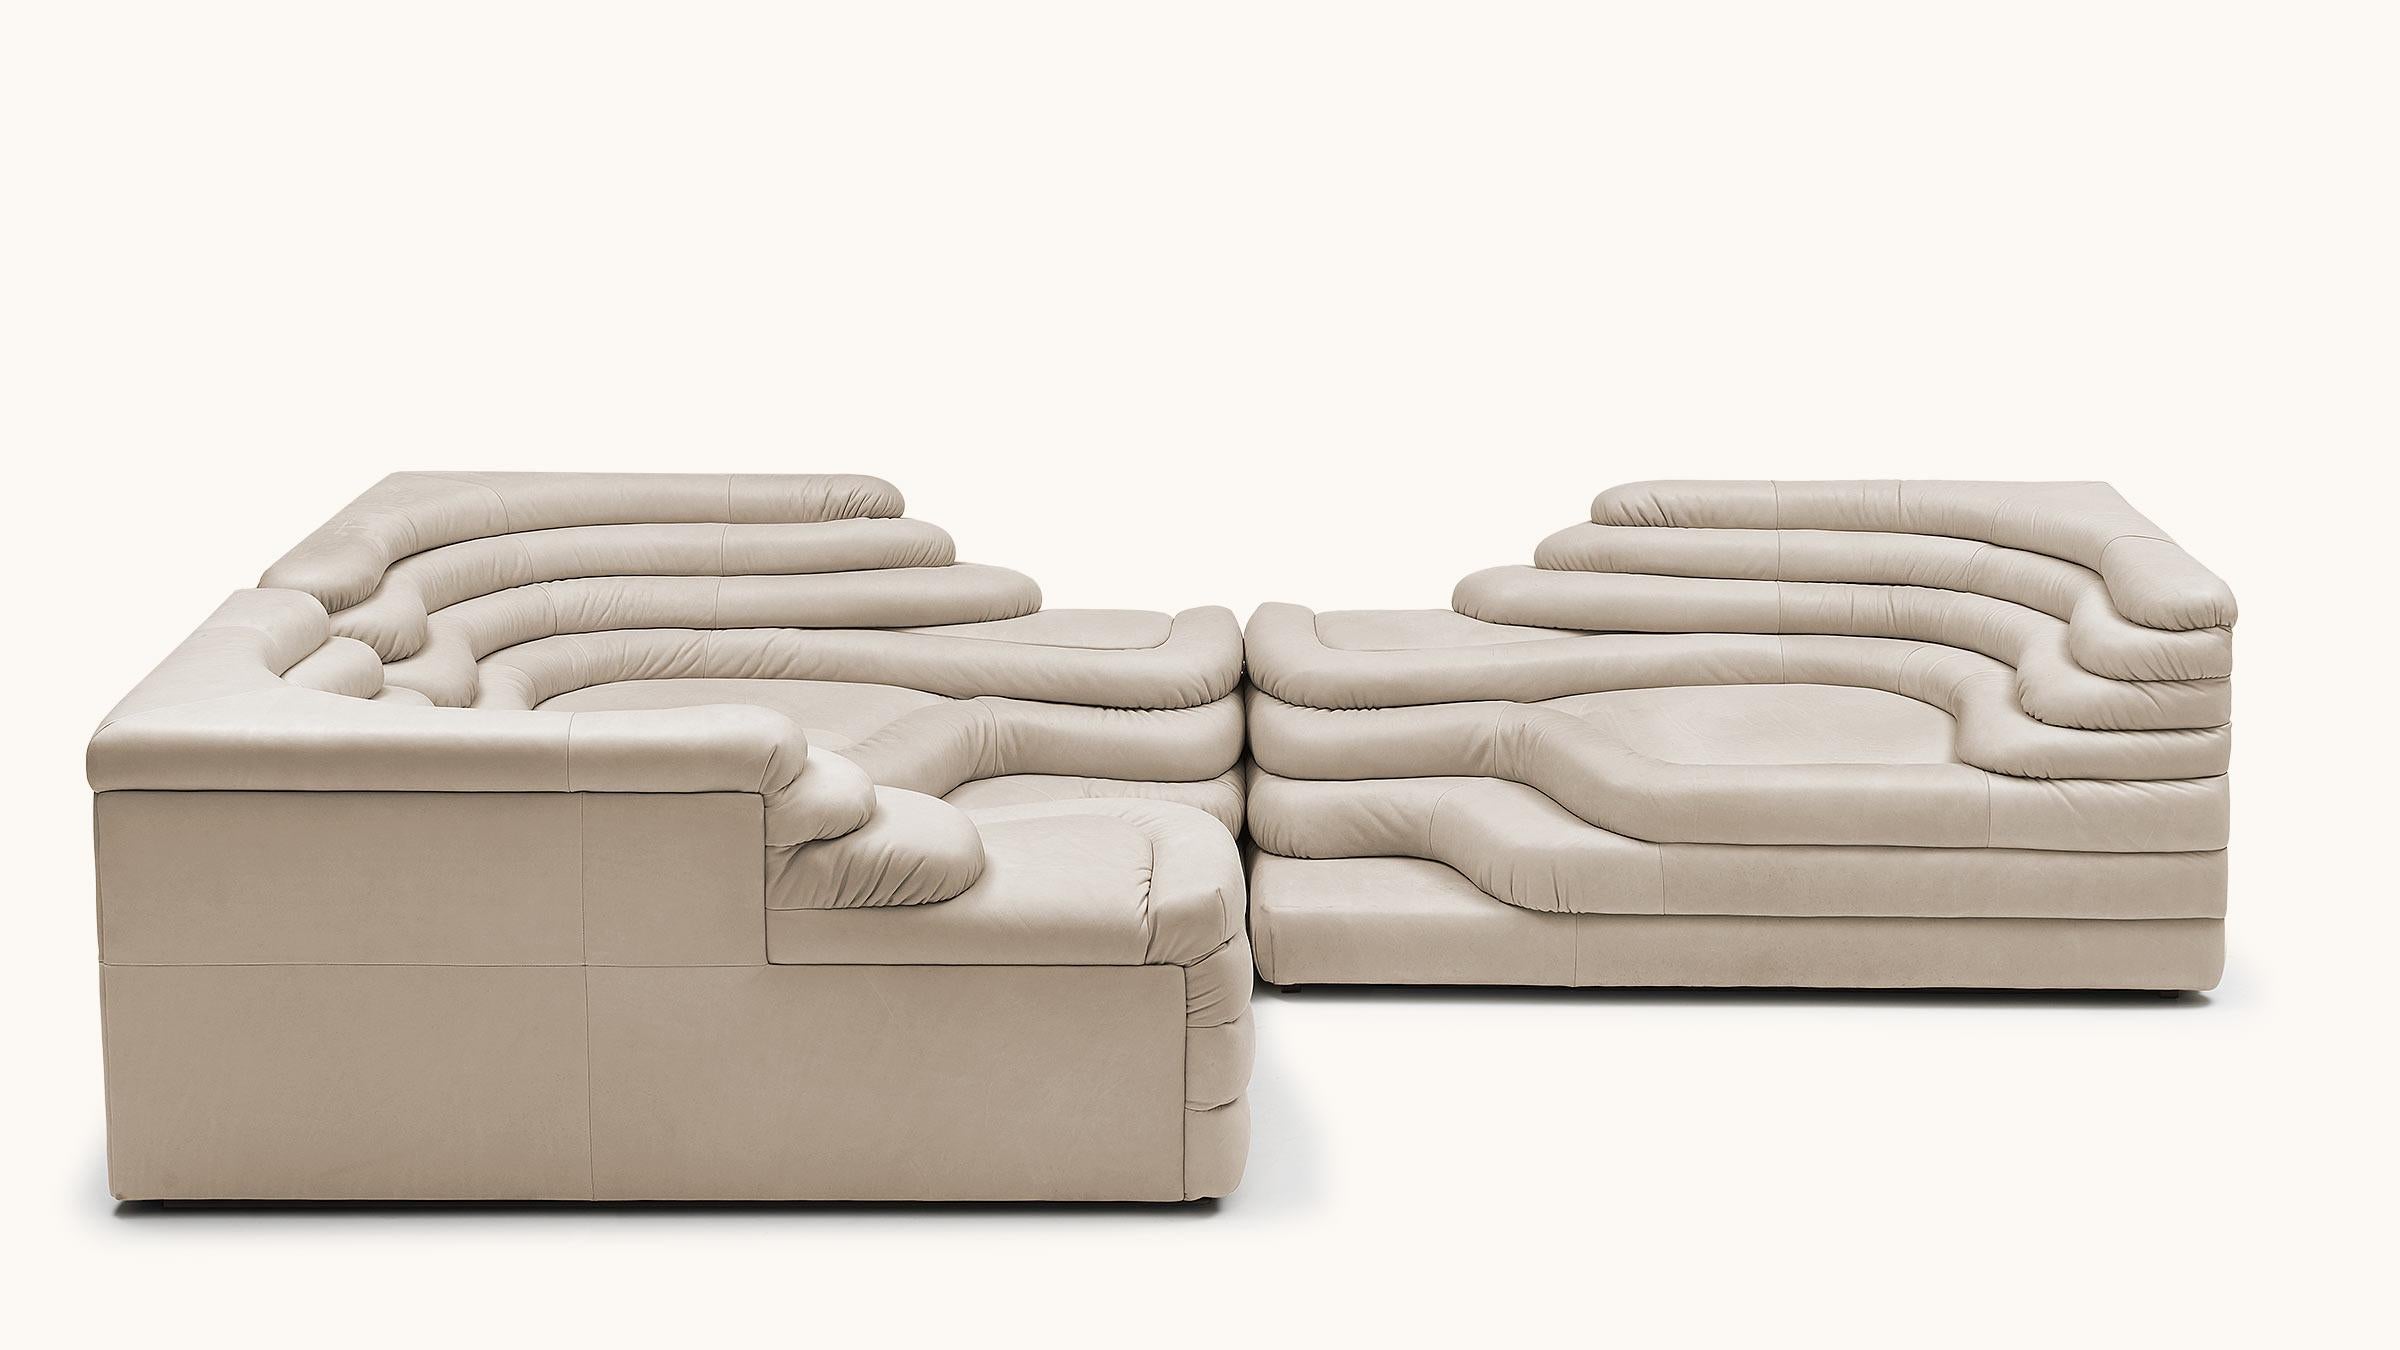 De Sede DS-1025/09 Terrazza Sofa in Perla Upholstery by Ubald Klug, 1 Element In New Condition For Sale In Brooklyn, NY